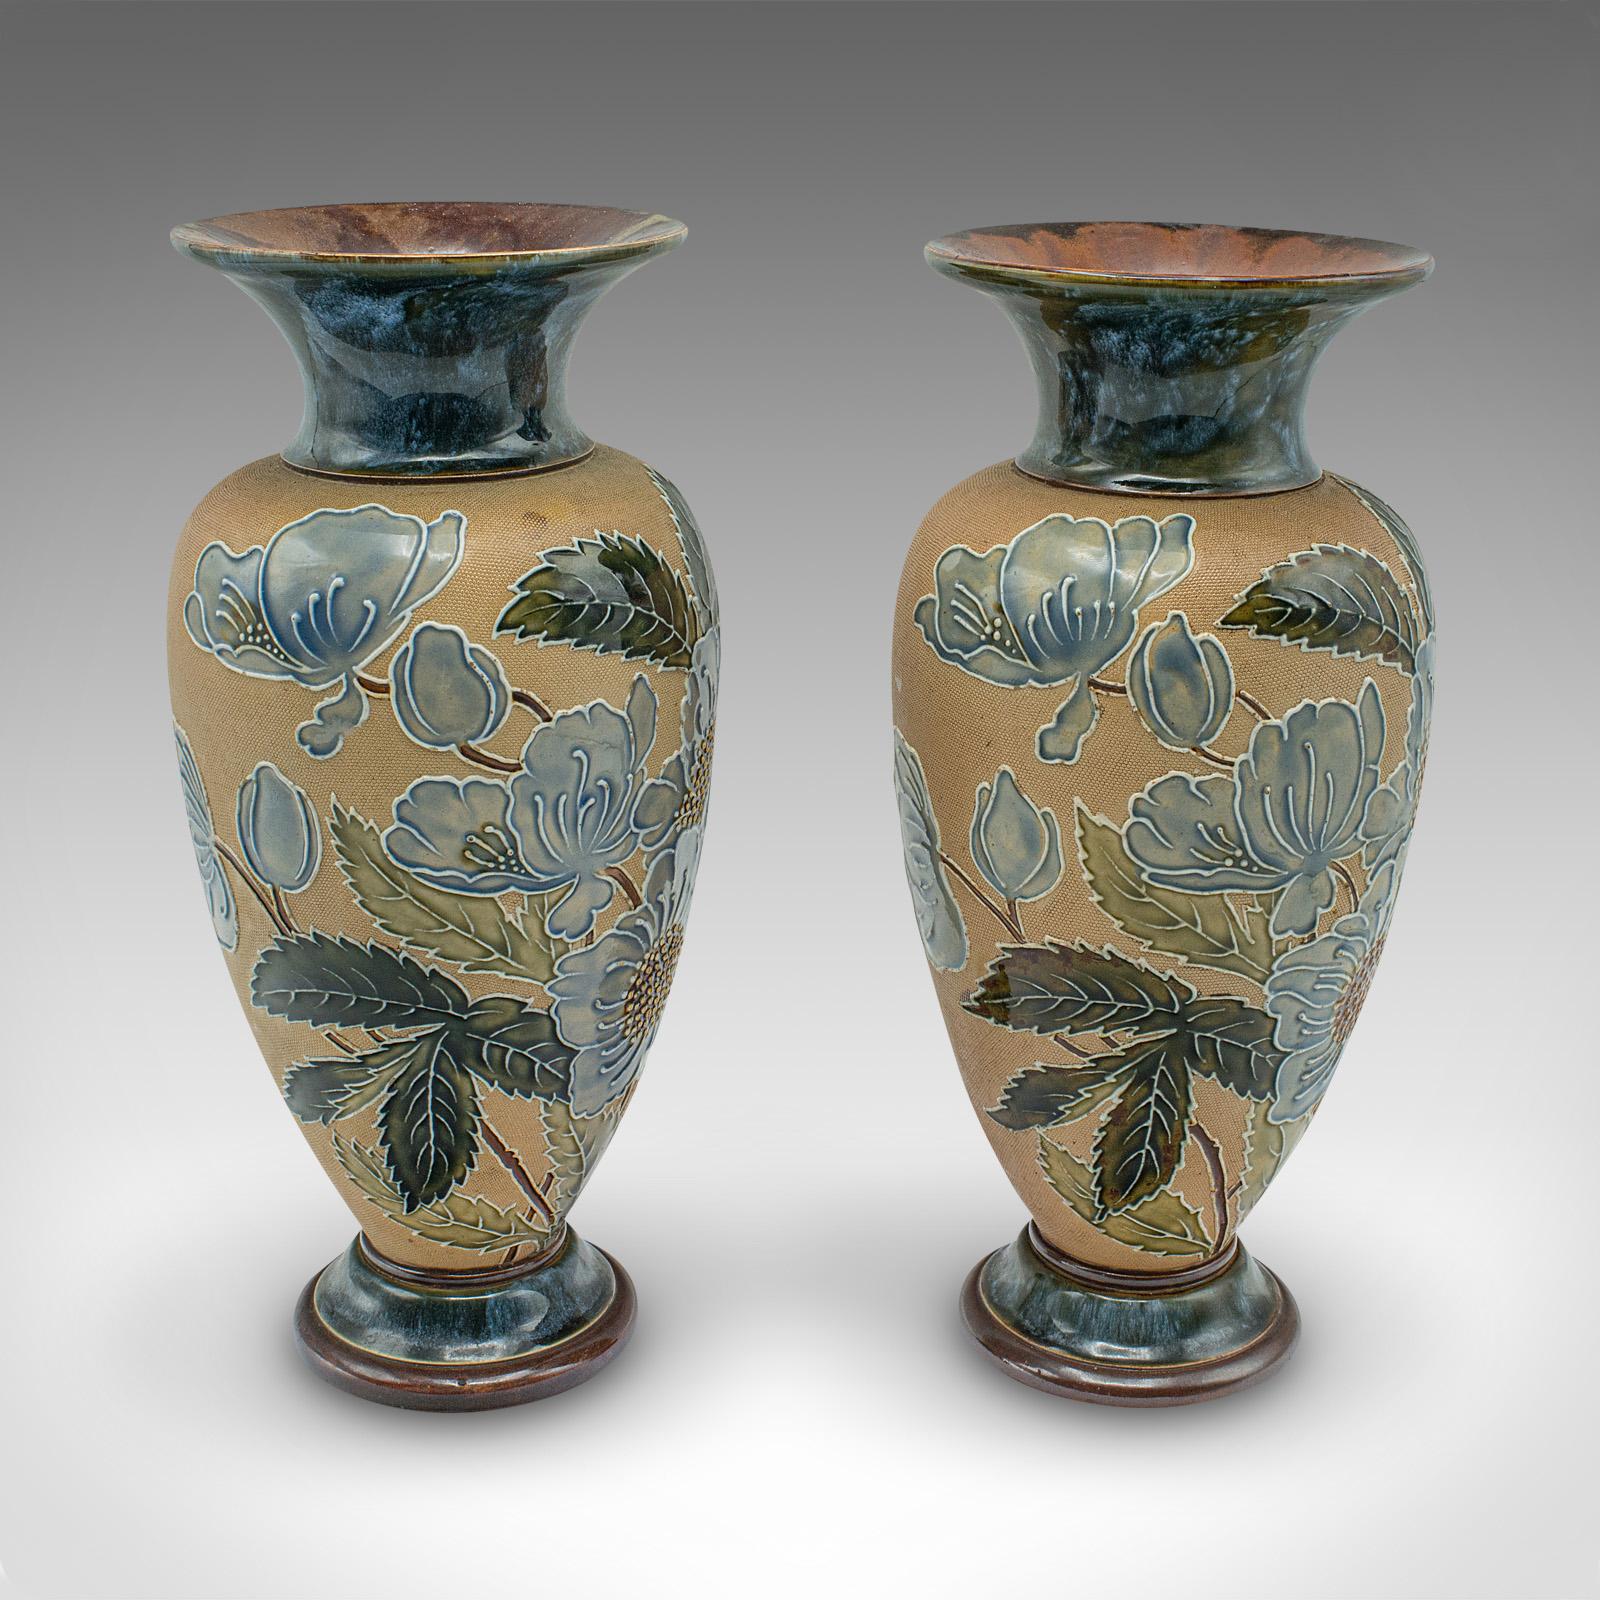 This is a pair of antique flower vases. An English, ceramic display urn, dating to the Edwardian period, circa 1910.

The Slater's Patent was the process of applying wet lace to the clay, with the resulting pattern leaving a textured pattern upon